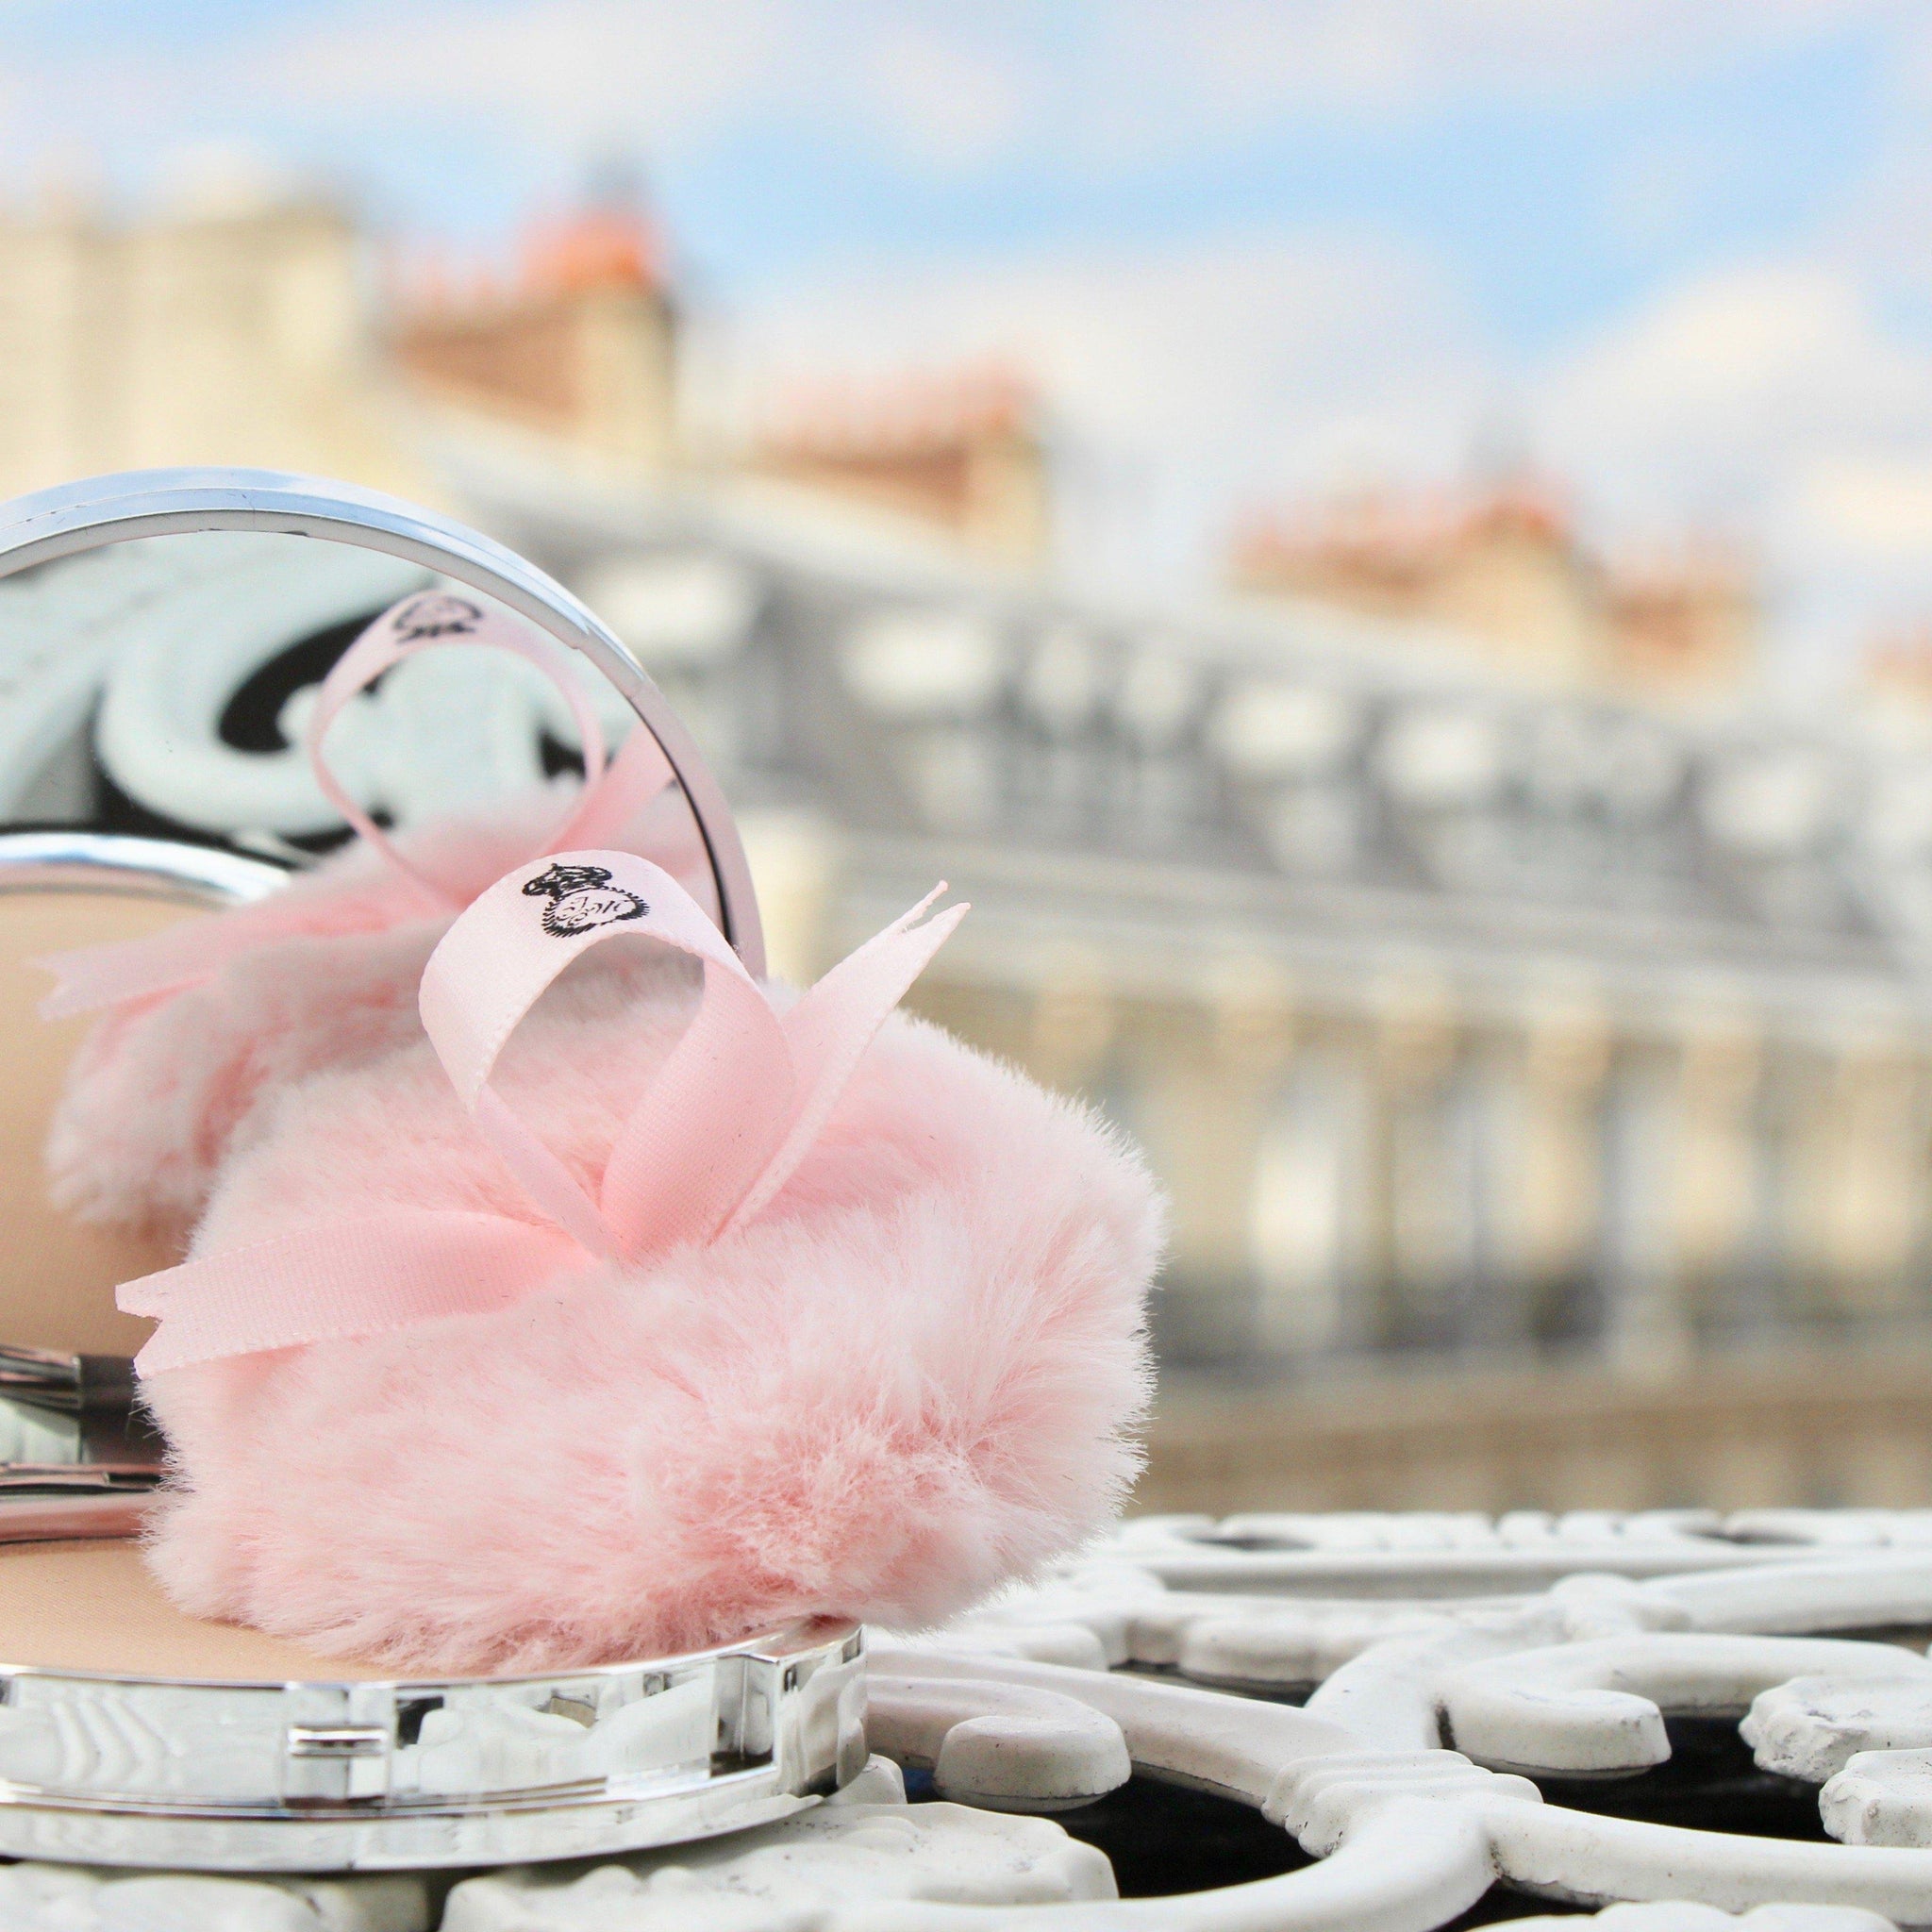 Luxurious French Powder Puff - Images by Miriam®